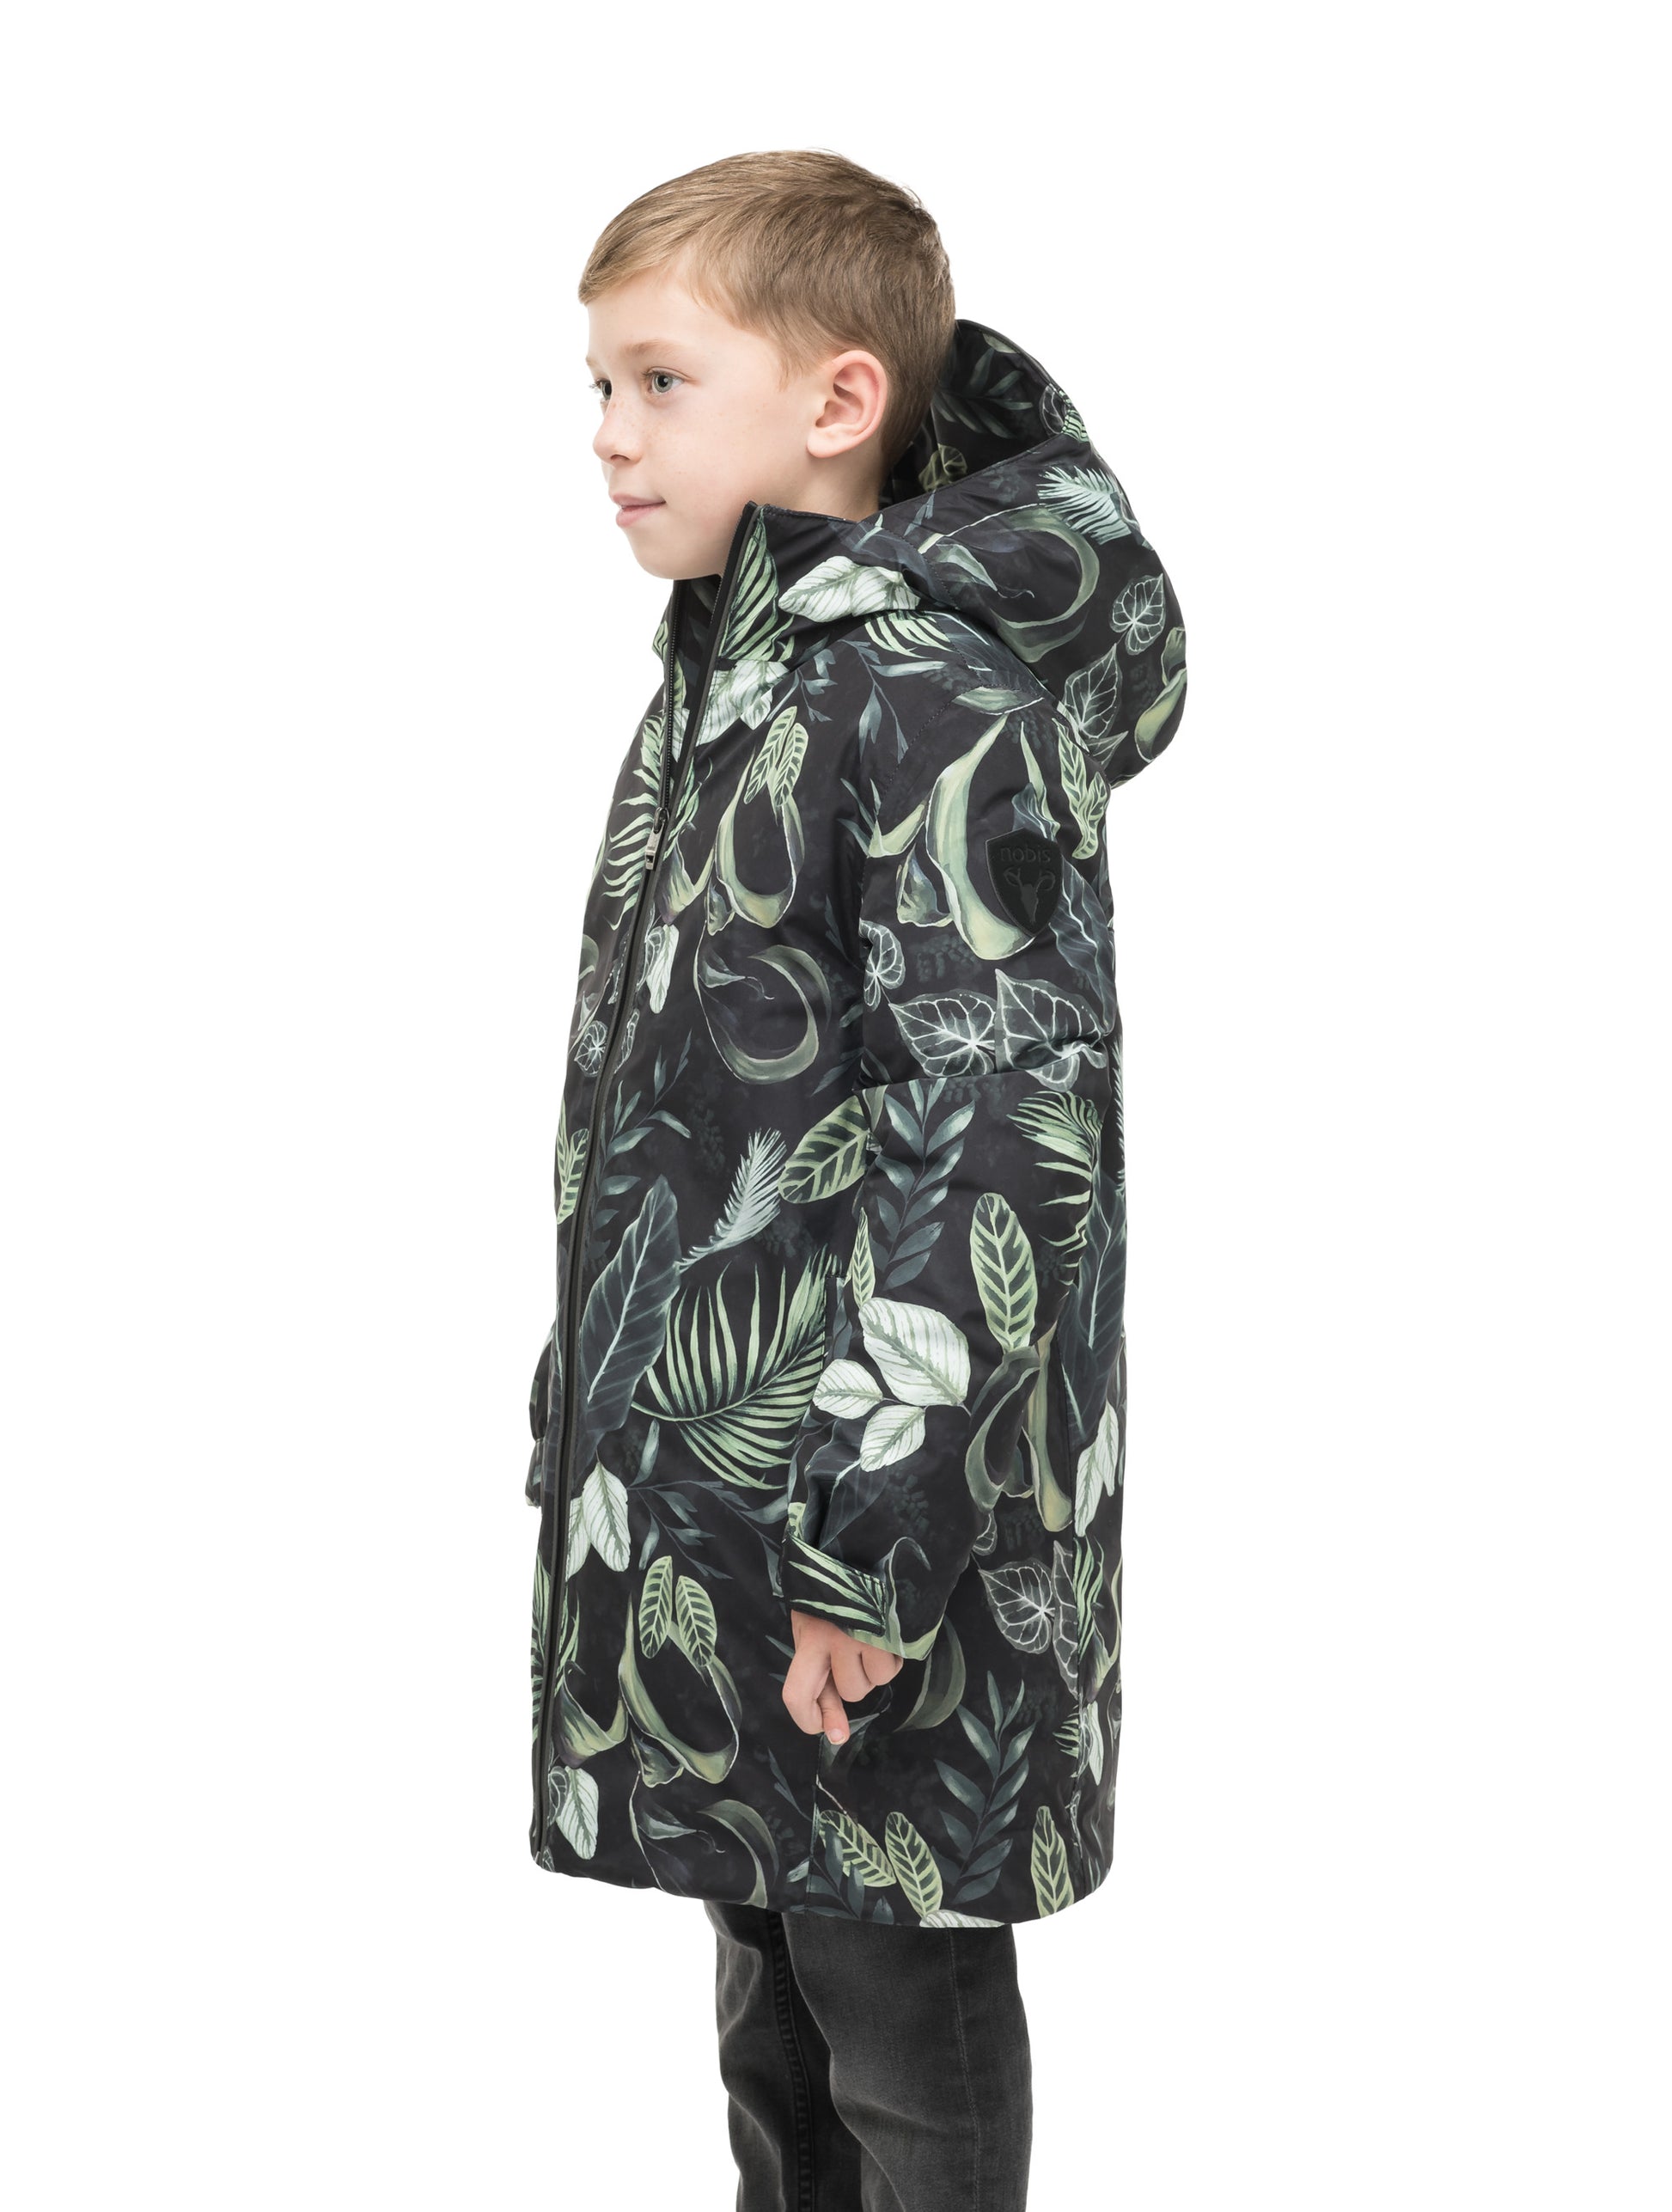 Little Comet Kids Parka in thigh length, Canadian duck down insulation, non-removable hood, two-way front zipper, packable body, in Foliage